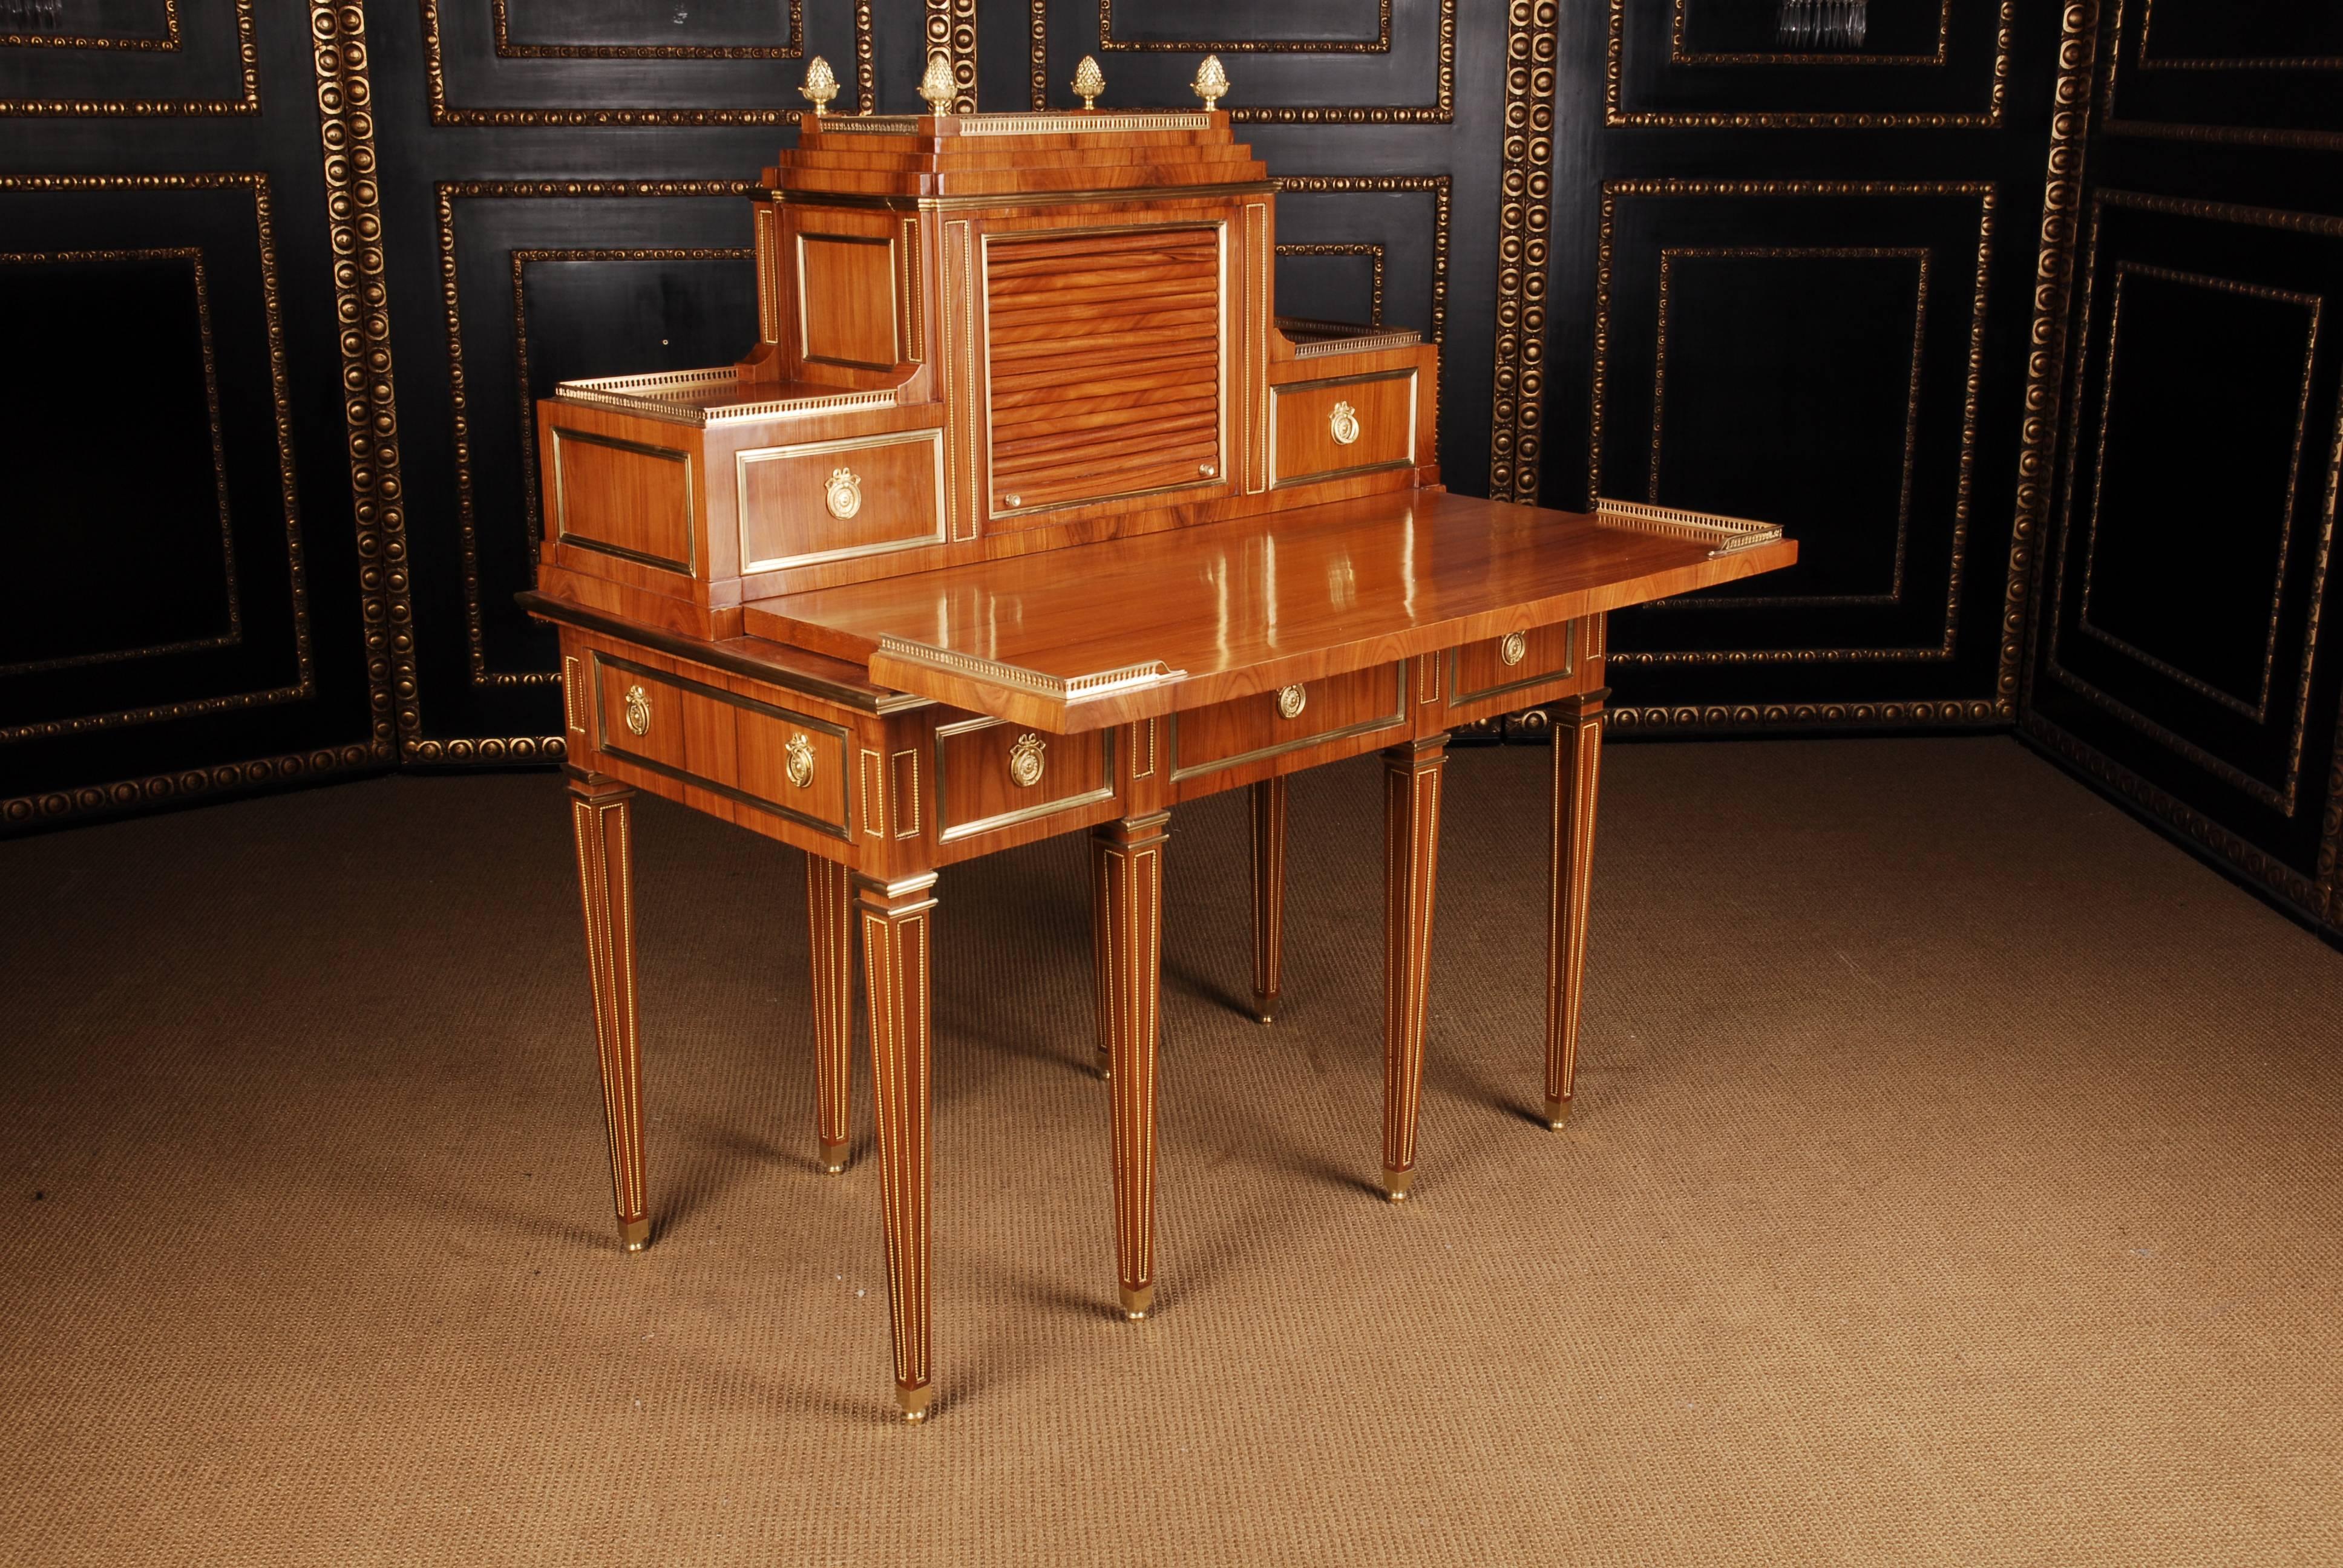 20th Century Writing Desk or Conversion Table after David Roentgen, 1780-1795